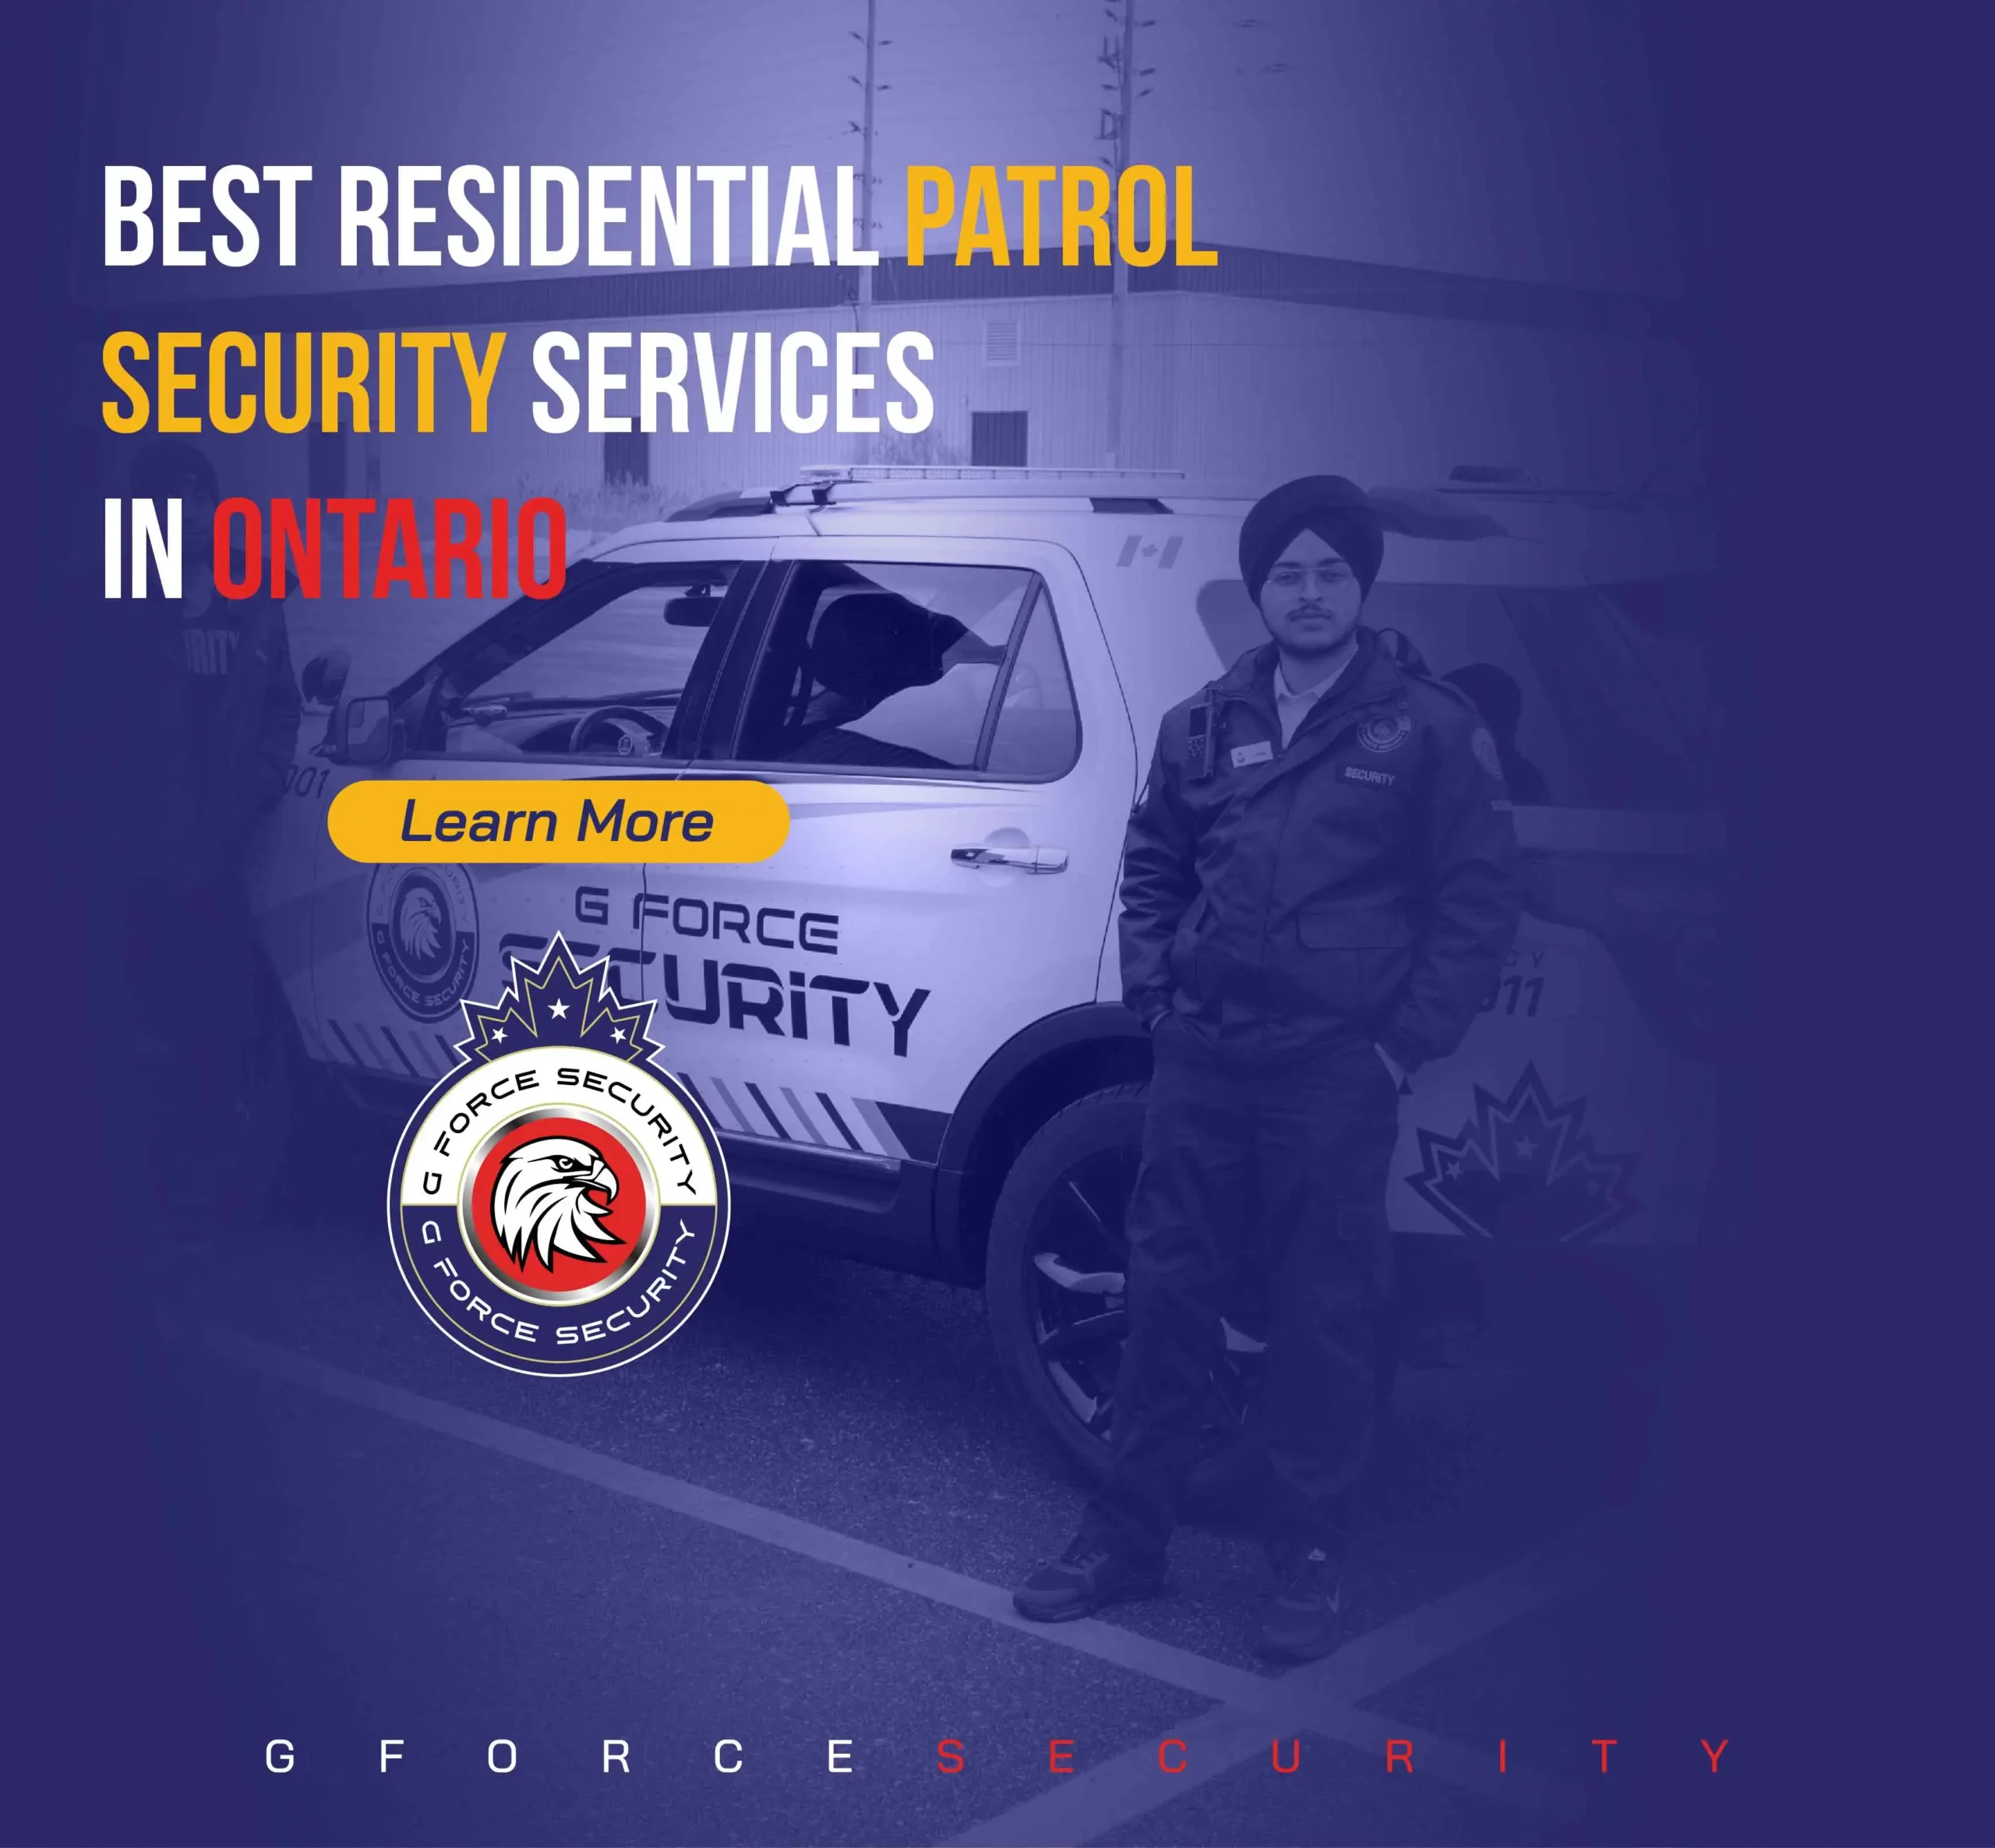 Best Residential Patrol Security Services in Ontario